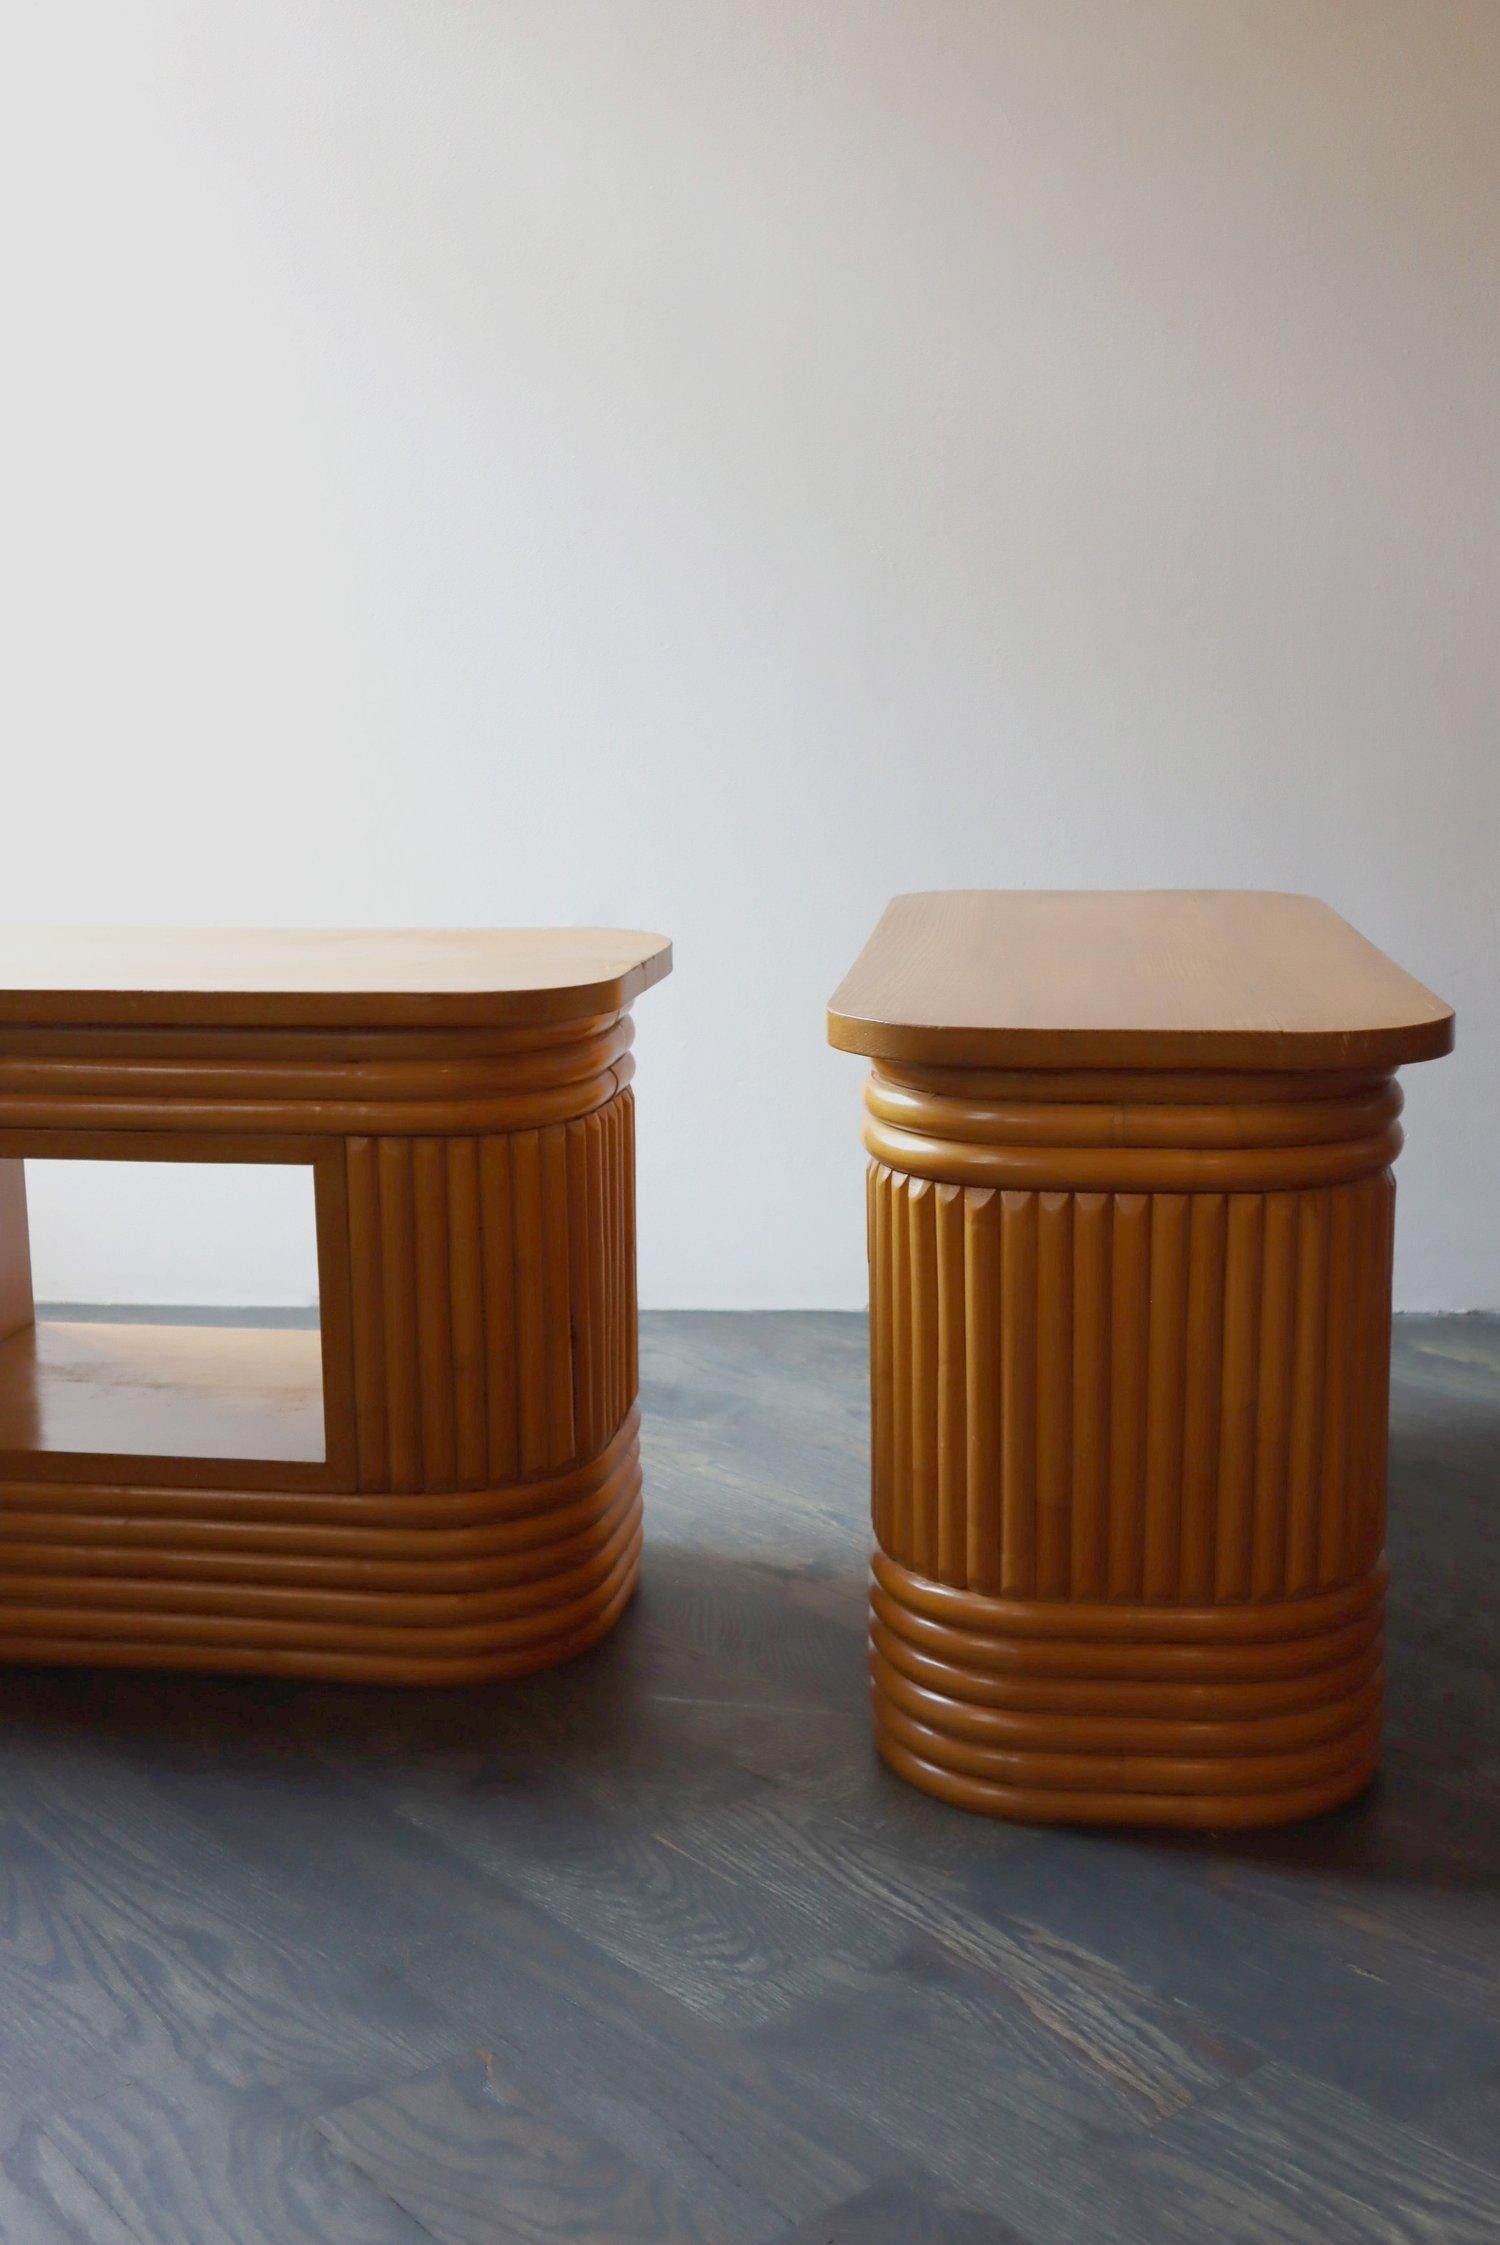 Pair of Midcentury/ Hollywood Regency bamboo oval reeded side tables.  Both are in superb condition.  This fantastic pair can be used indoors or on an outdoor sun porch.

